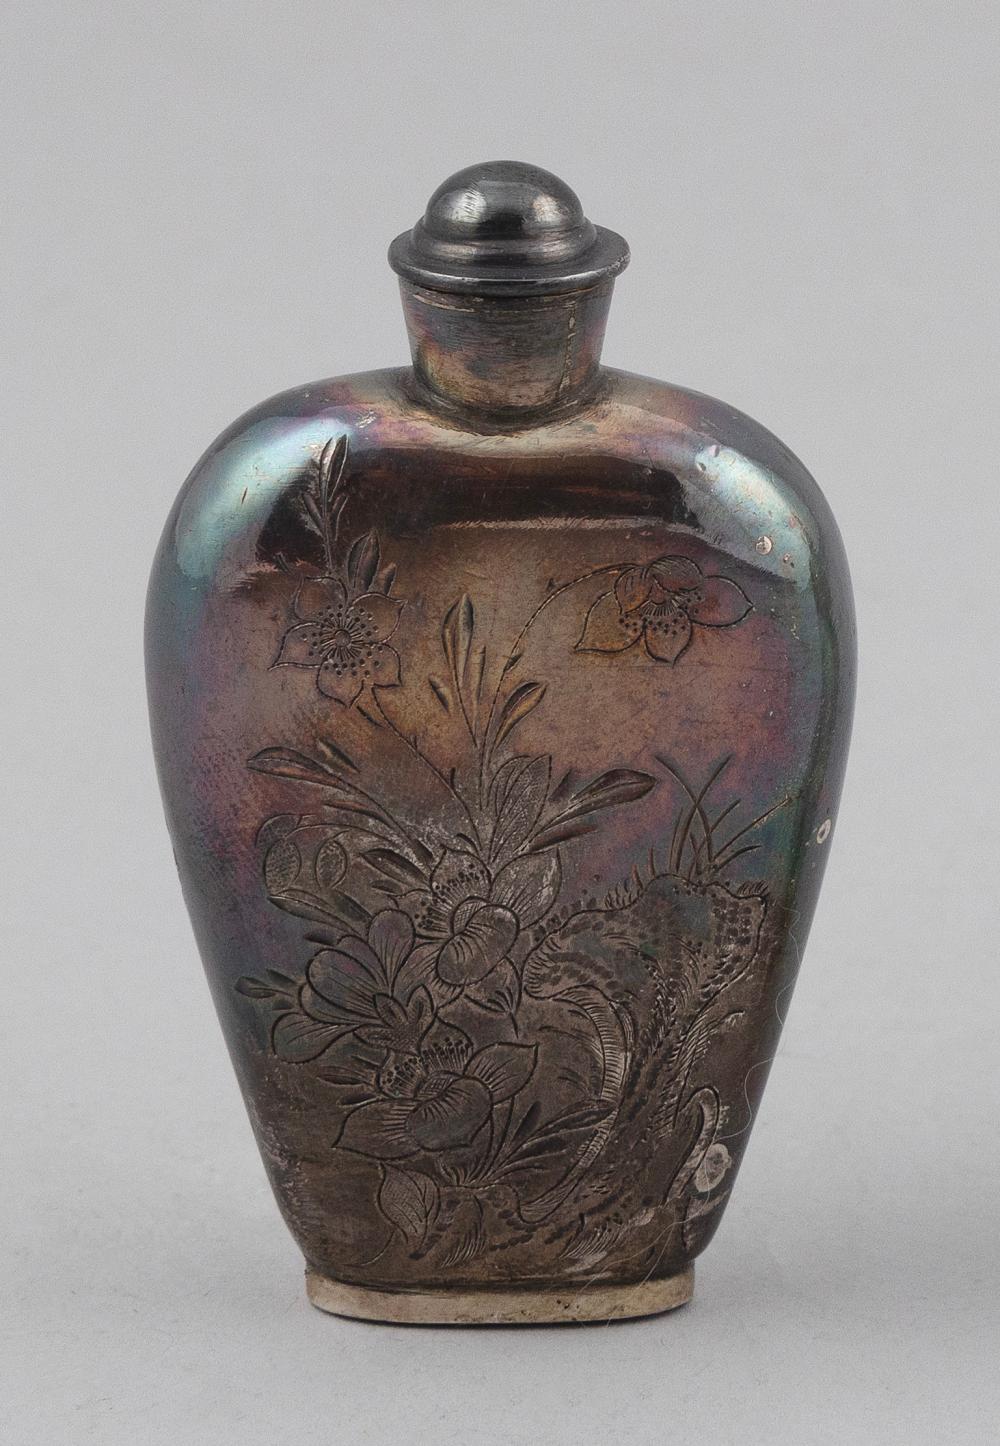 CHINESE ENGRAVED SILVER SNUFF BOTTLE 3c7d07